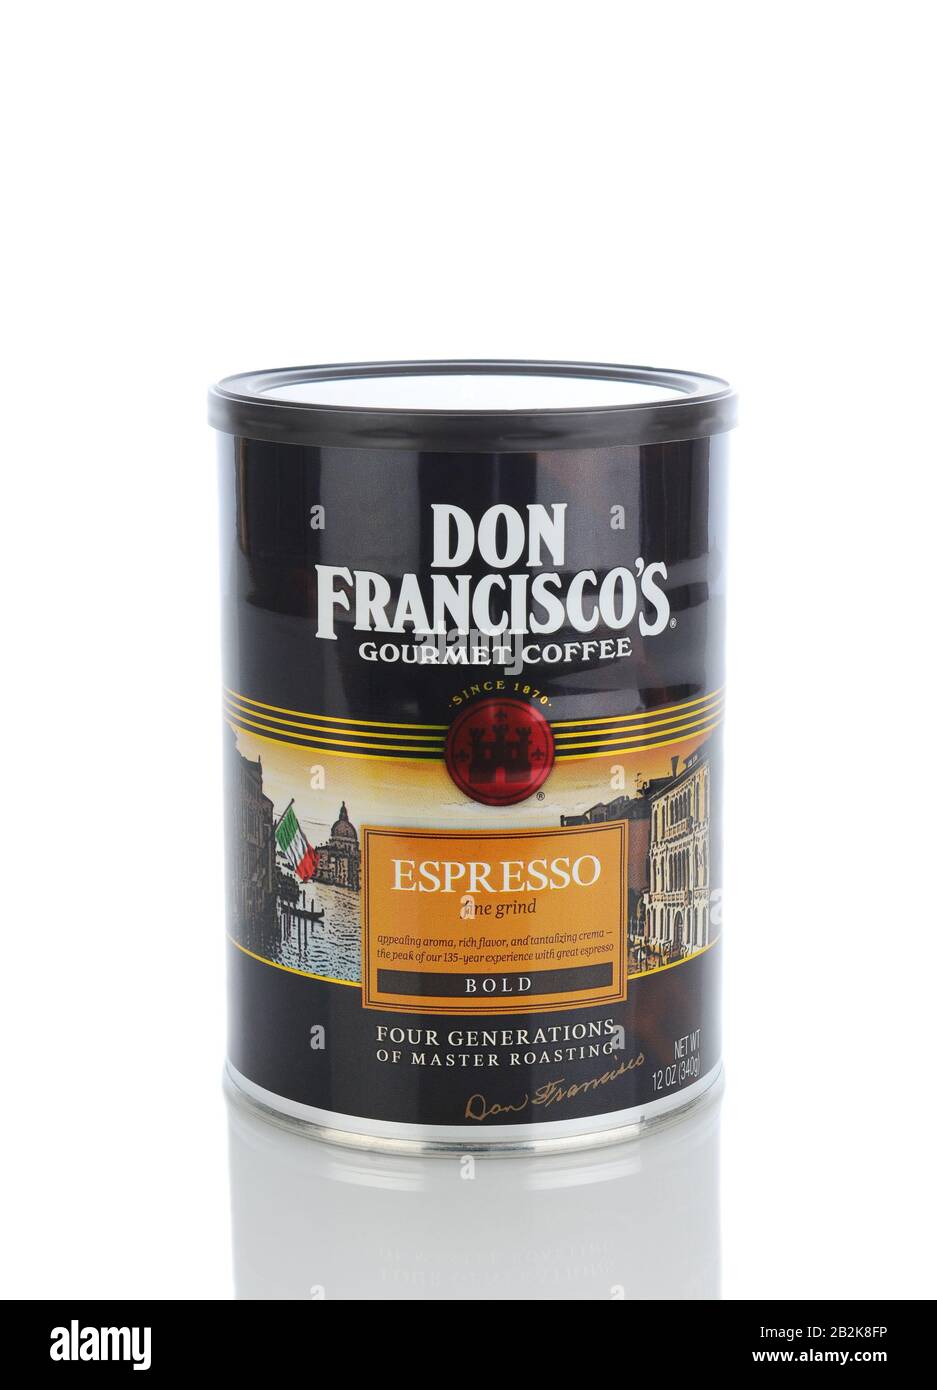 IRVINE, CA - January 11, 2013: A 12 can of Don Franciscos Gourmet Coffee. Founded in 1984 by the Gaviña family, Don Franciscos is one of the top 10 co Stock Photo